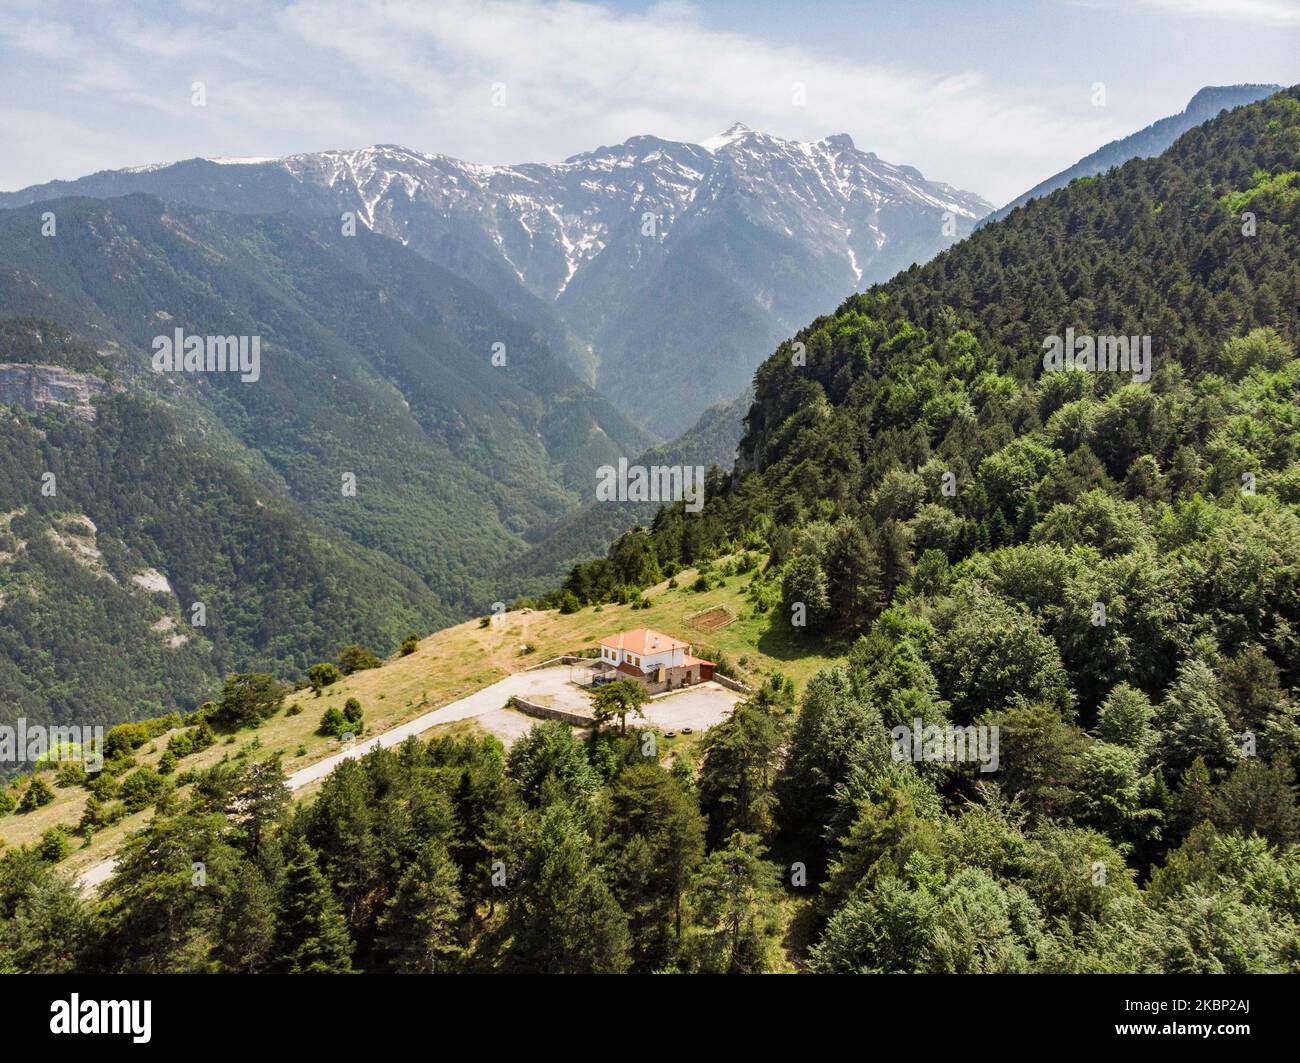 Aerial view of Mount Olympus, the highest mountain in Greece as seen from a drone with the steep hills, gorges, deep canyons, caves, thick forest and snow-covered peaks. The highest peak is Mytikasat 2918 meters and the mountain was notable in Greek Mythology as home of the gods. It is a National Park in Greece and a World Biosphere Reserve with rich biodiversity and flora. Olympus is an organized mountain with mount activities with many mountain refuges and many climbing and trekking routes for hikers or climbers. Near Olympus are the located the golden sand beaches of Pieria offering the com Stock Photo